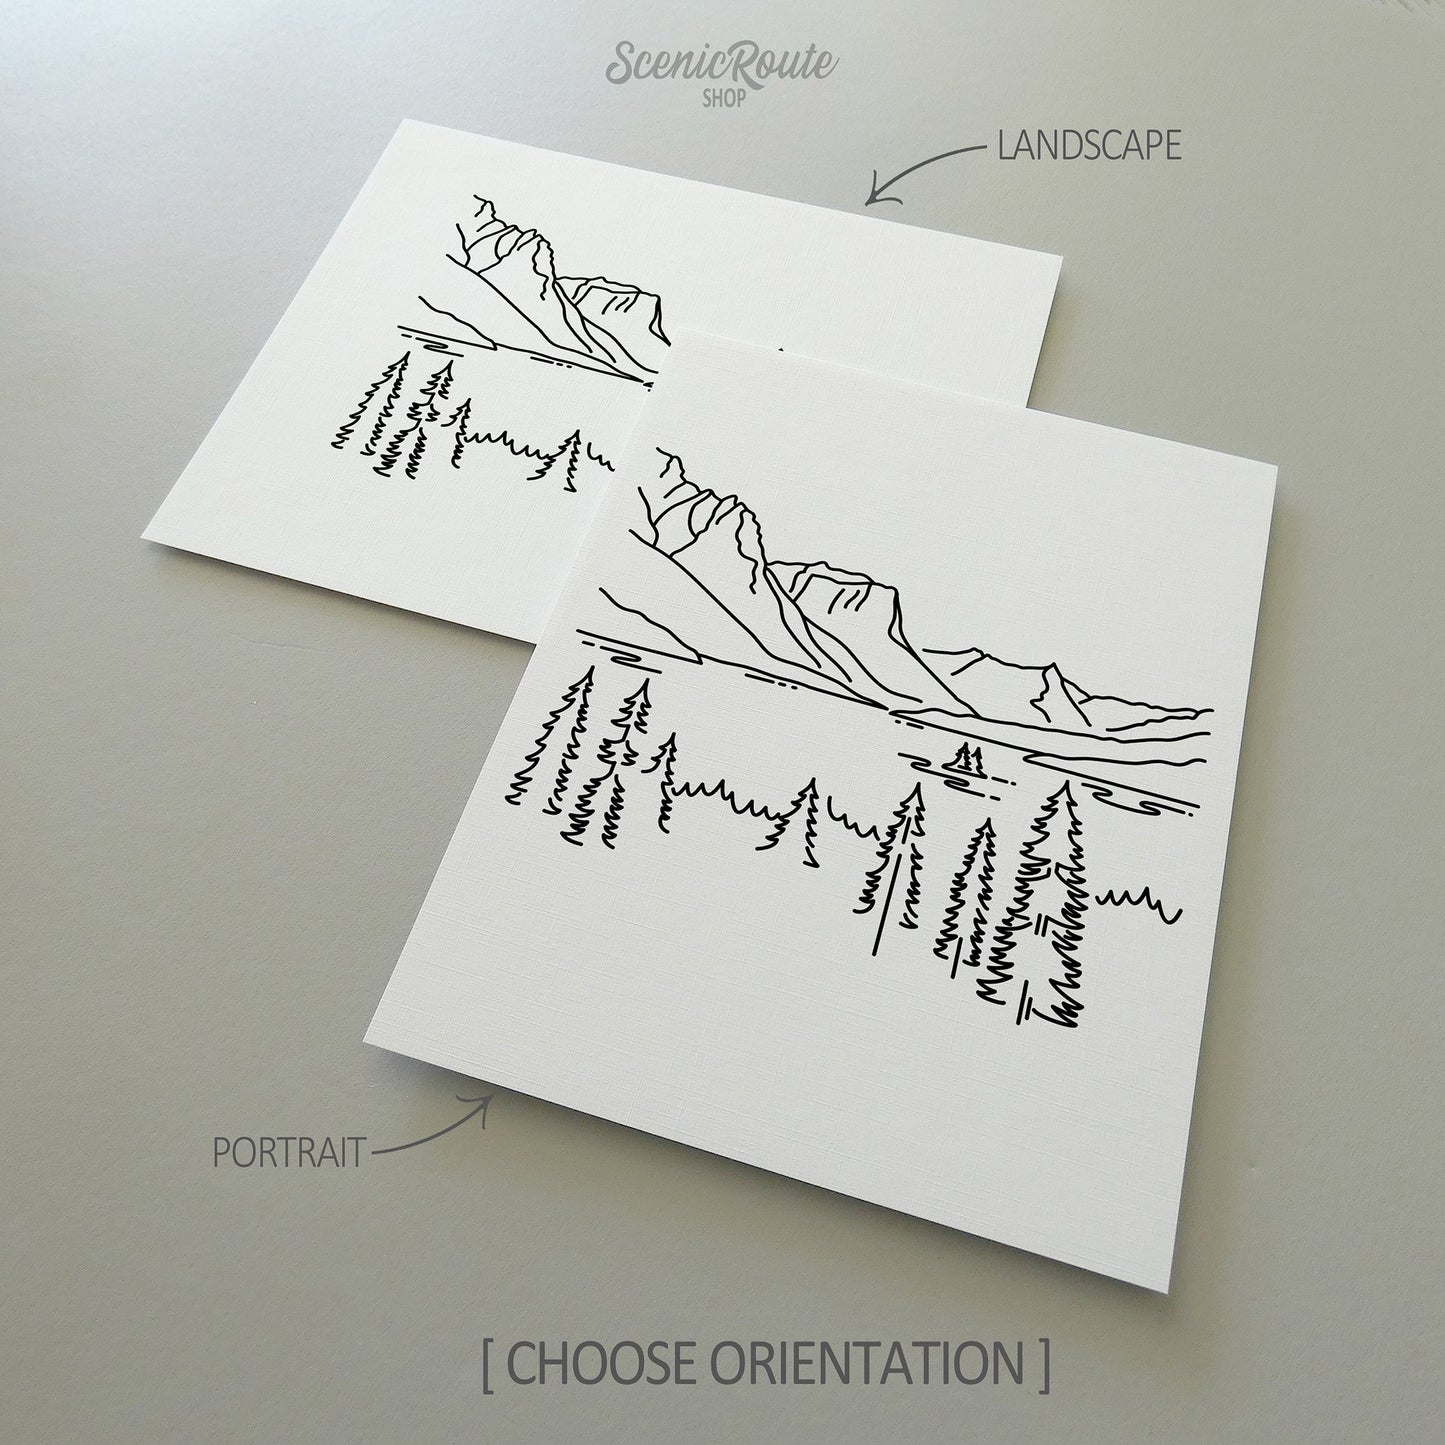 Two line art drawings of Glacier National Park on white linen paper with a gray background.  The pieces are shown in portrait and landscape orientation for the available art print options.